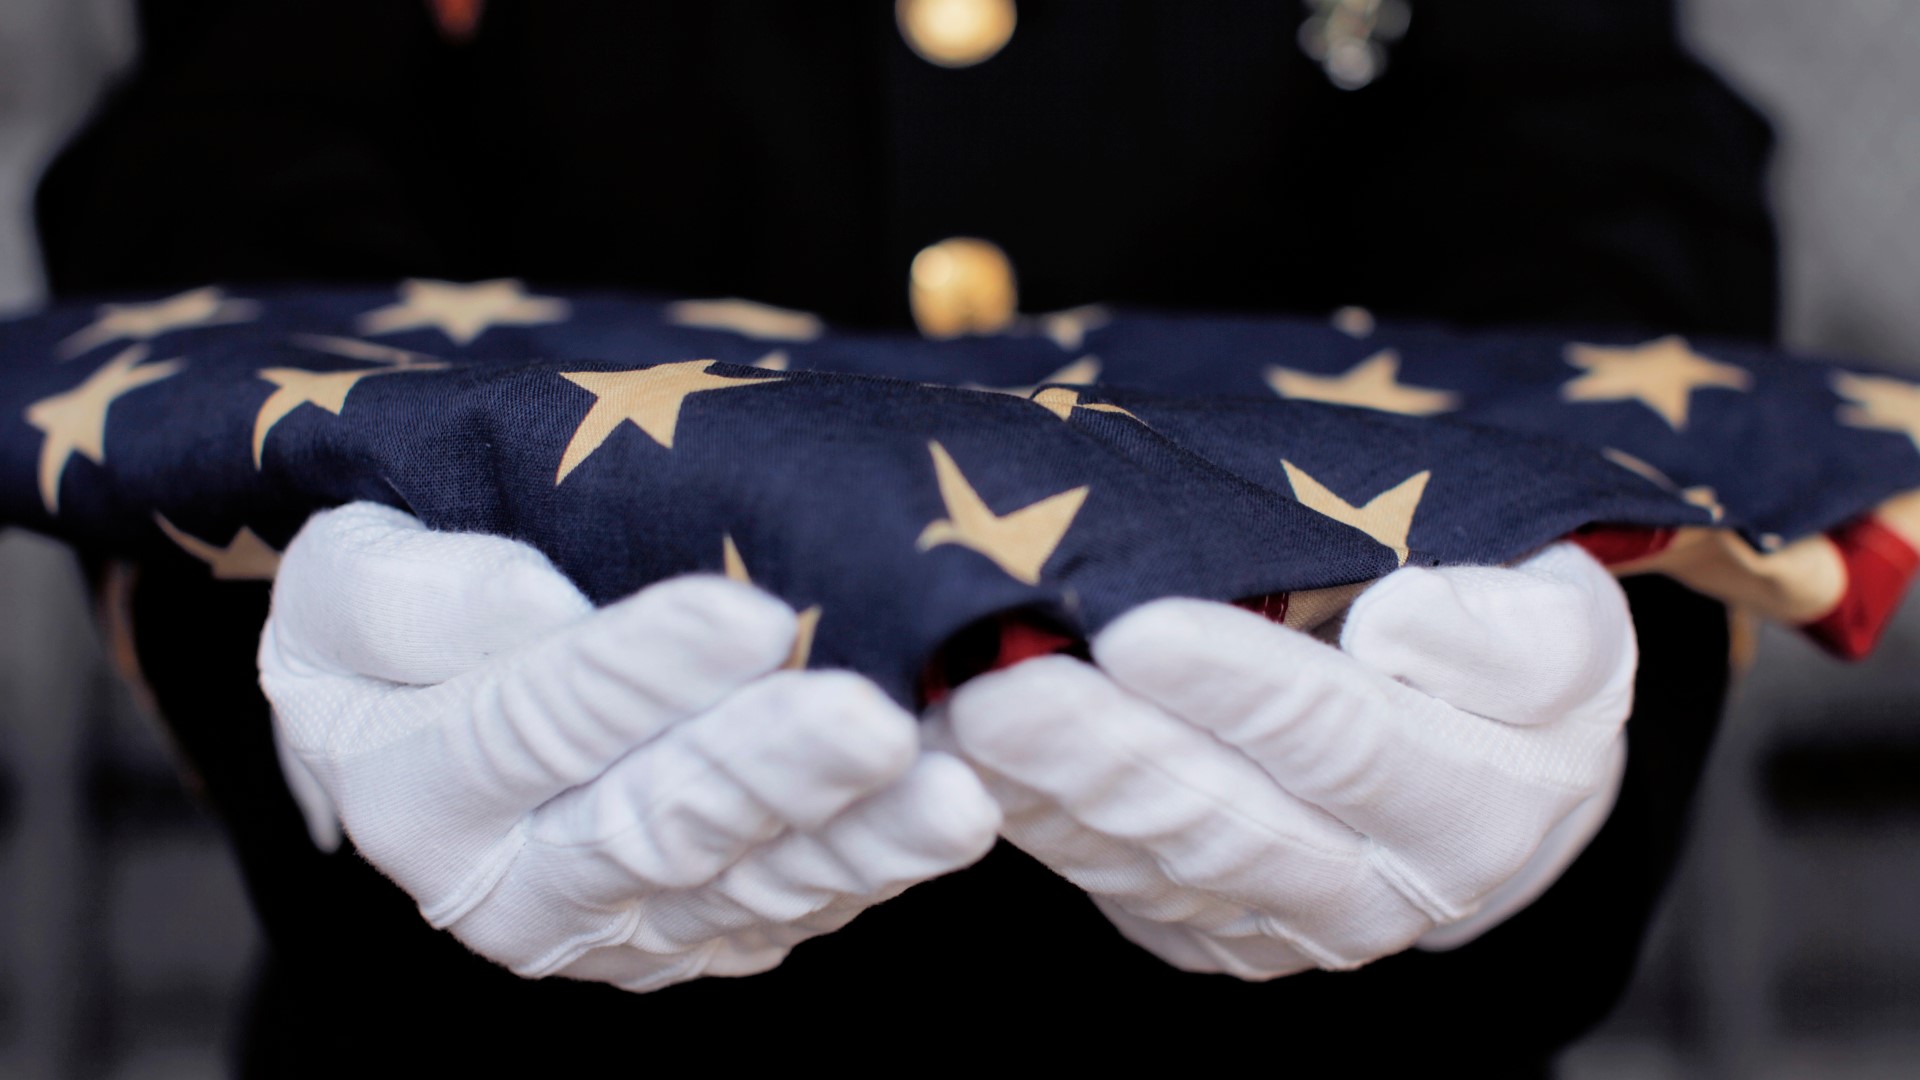 The folding of the flag is something you may have seen happen, whether in movies, on television or even real life. But have you ever noticed how Honor Guards pay careful attention to correctly fold the flag 13 times?